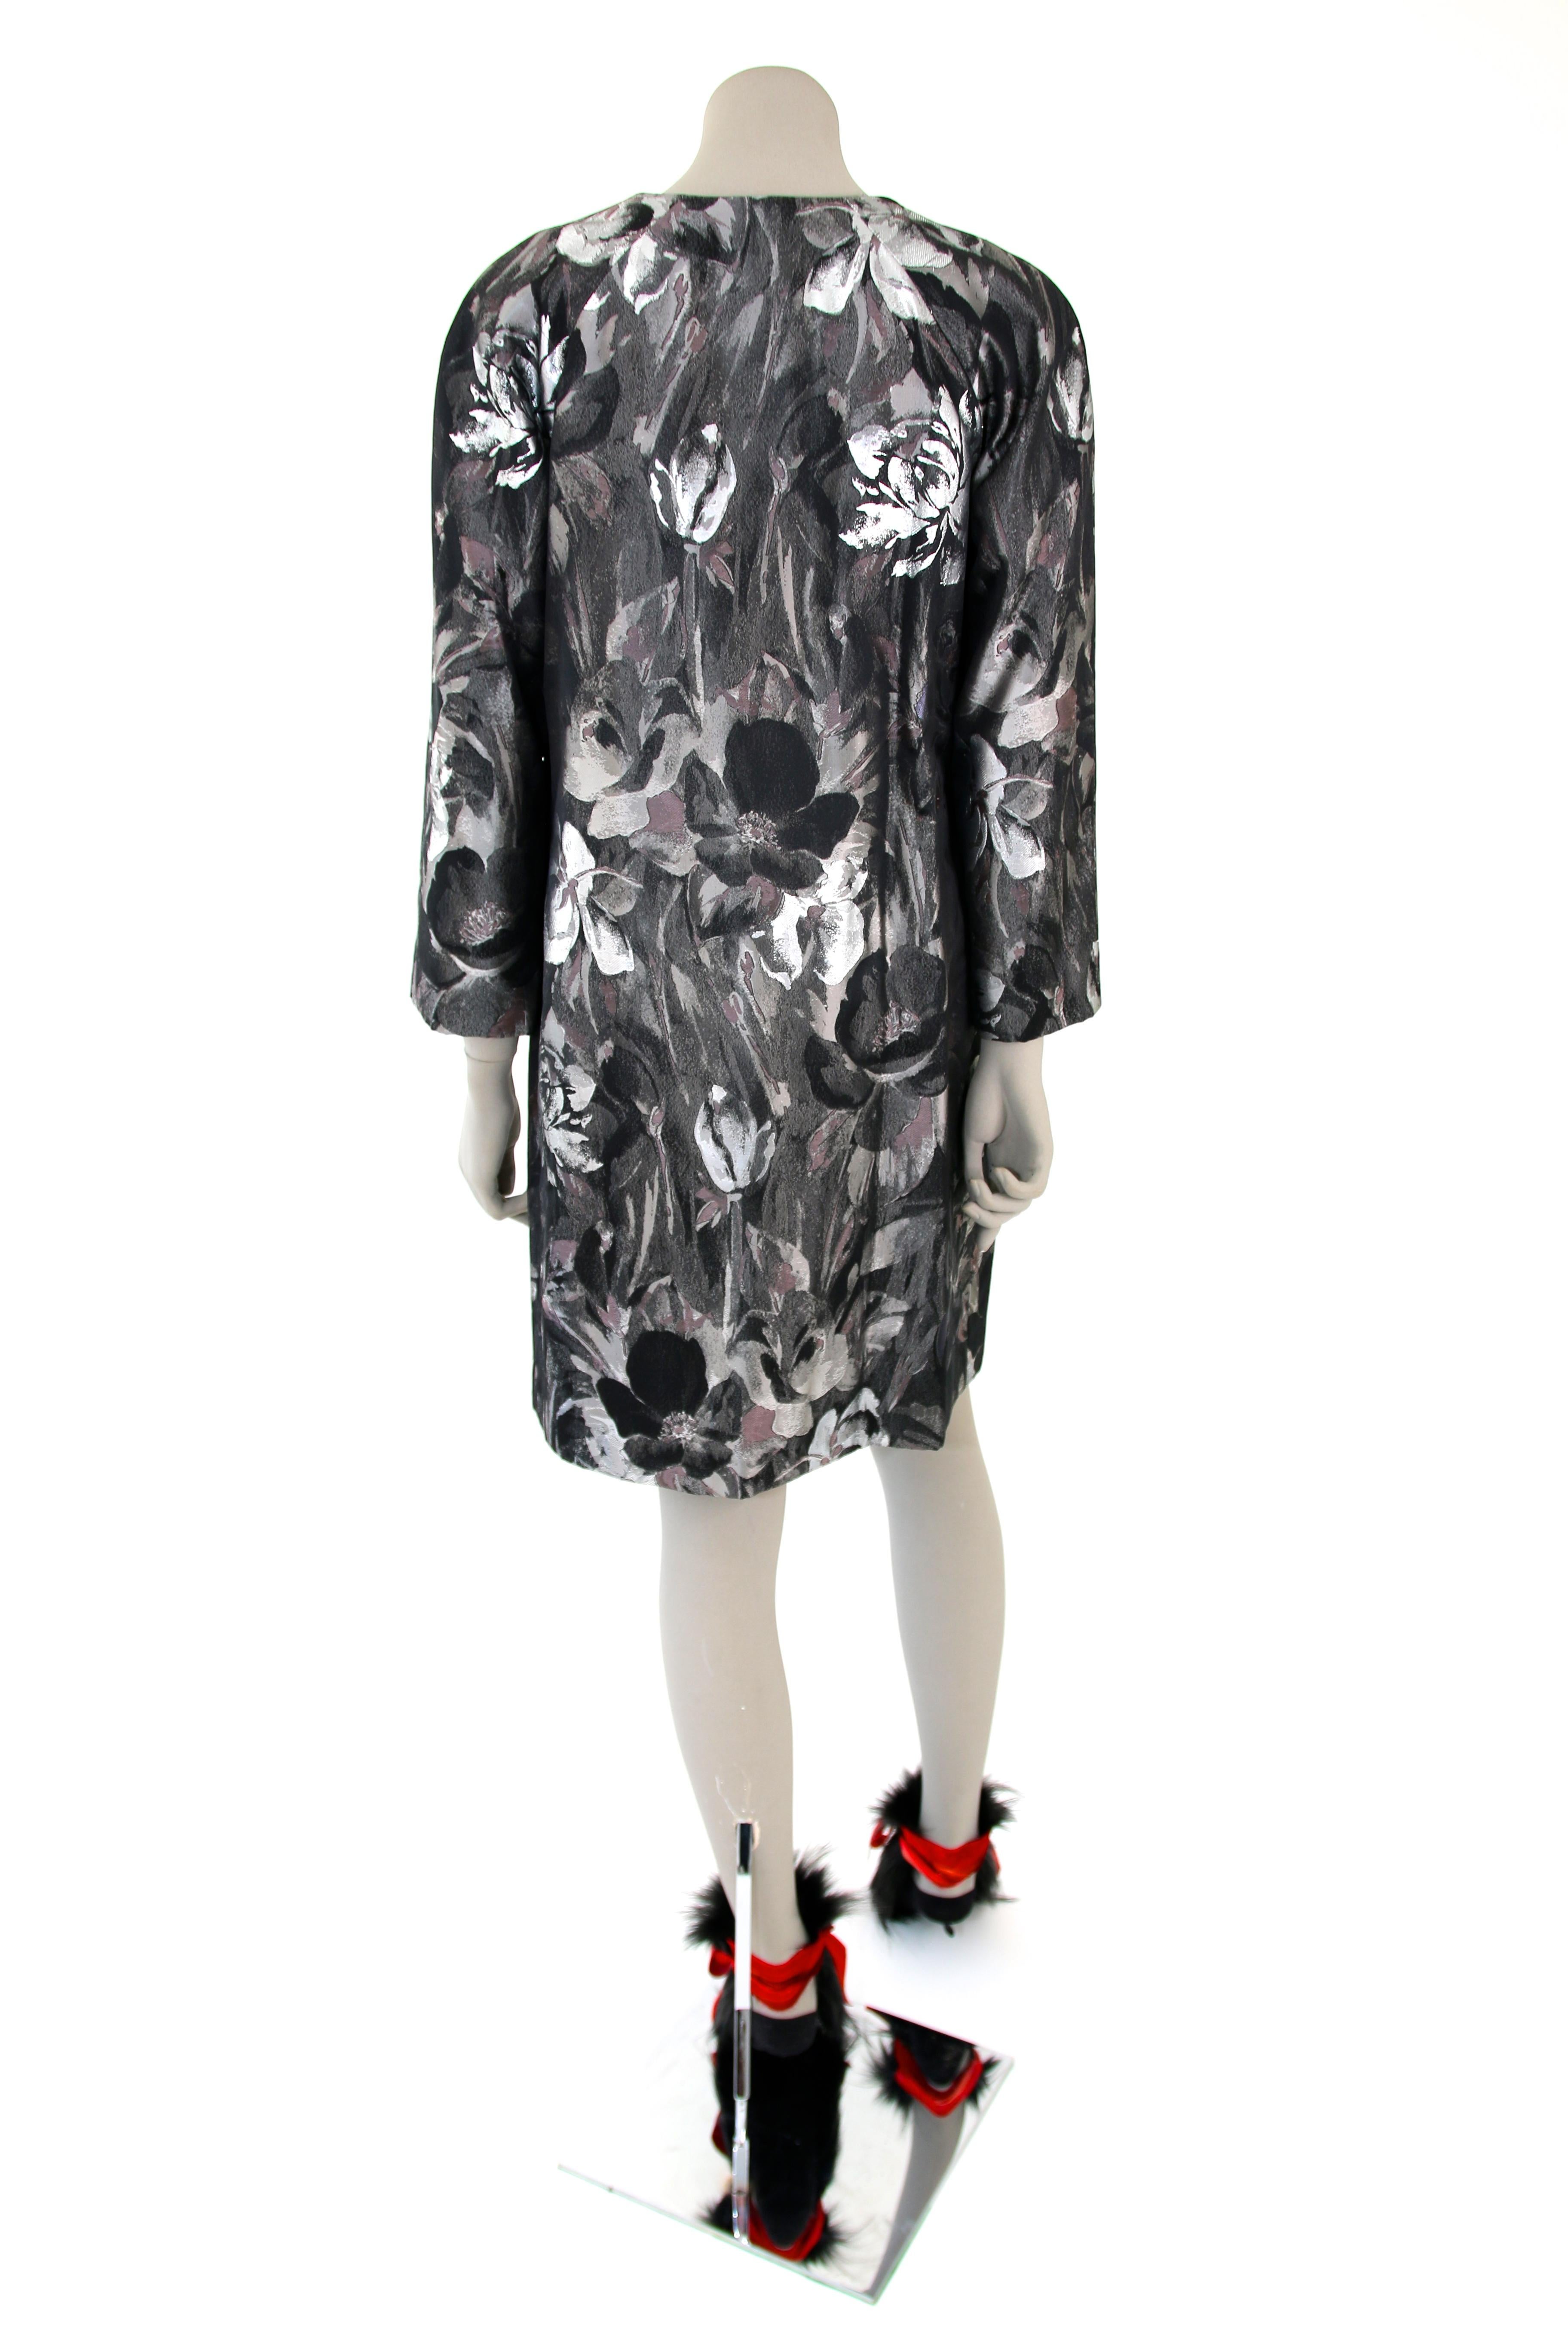 Pelush Black and Silver Brocade Printed Flower Coat - XS For Sale 3